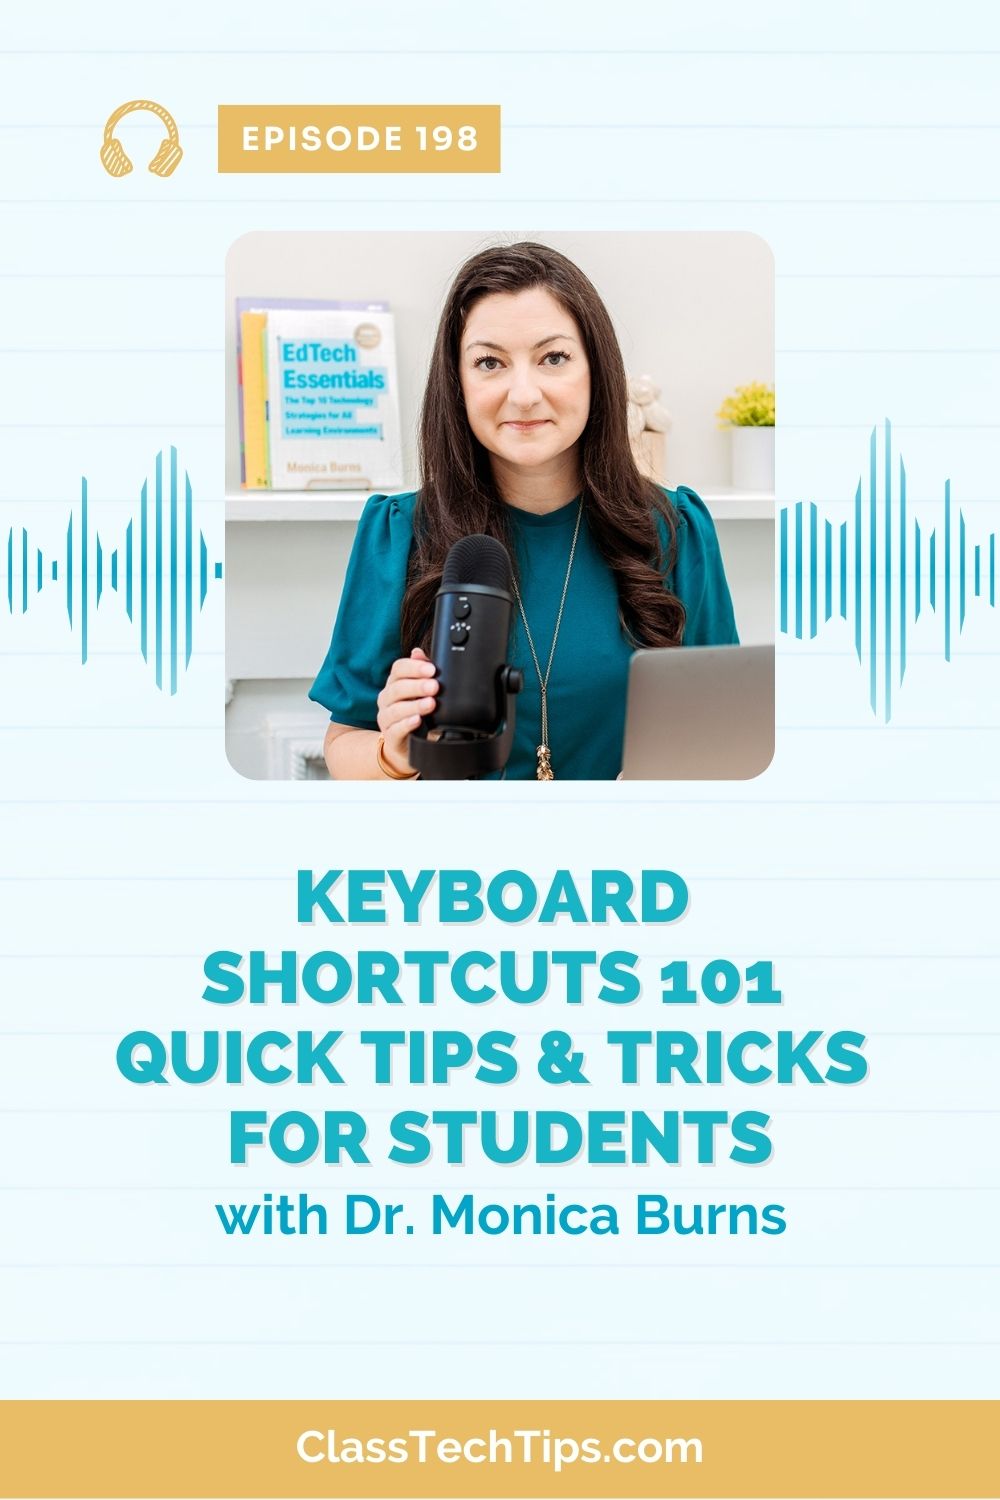 In this episode, we dive into how introducing keyboard shortcuts to students is actually teaching a "lifelong" tech skill. Plus I share tips and resources to help any teacher get started. If you want to ensure that your students have skills they can use to navigate digital spaces efficiently, this episode is for you!